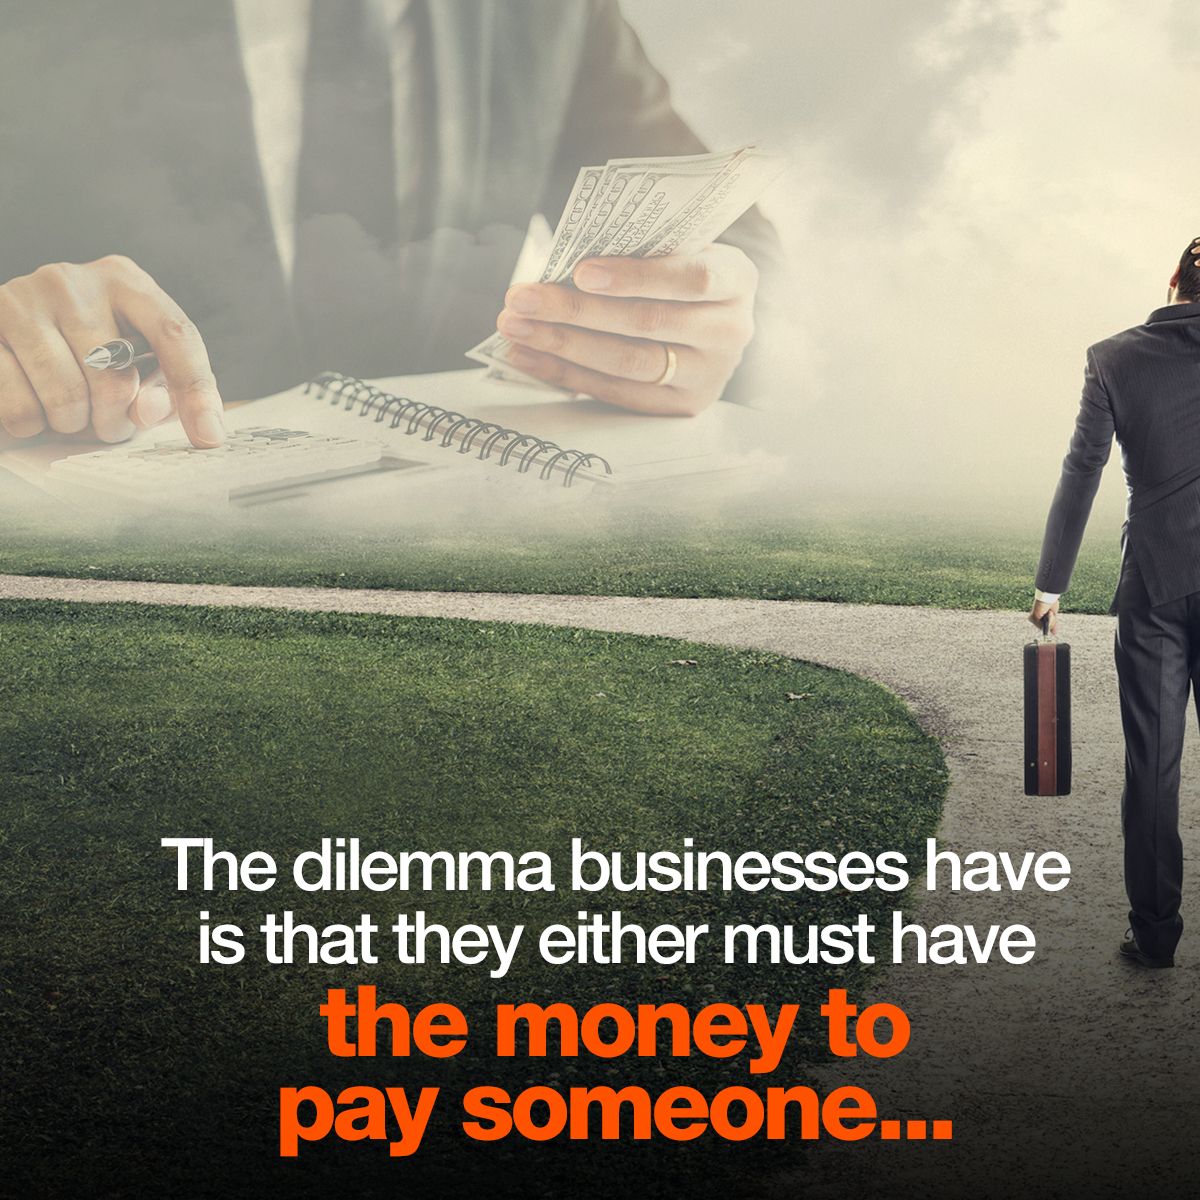 The dilemma businesses have is that they either must have the money to pay someone...